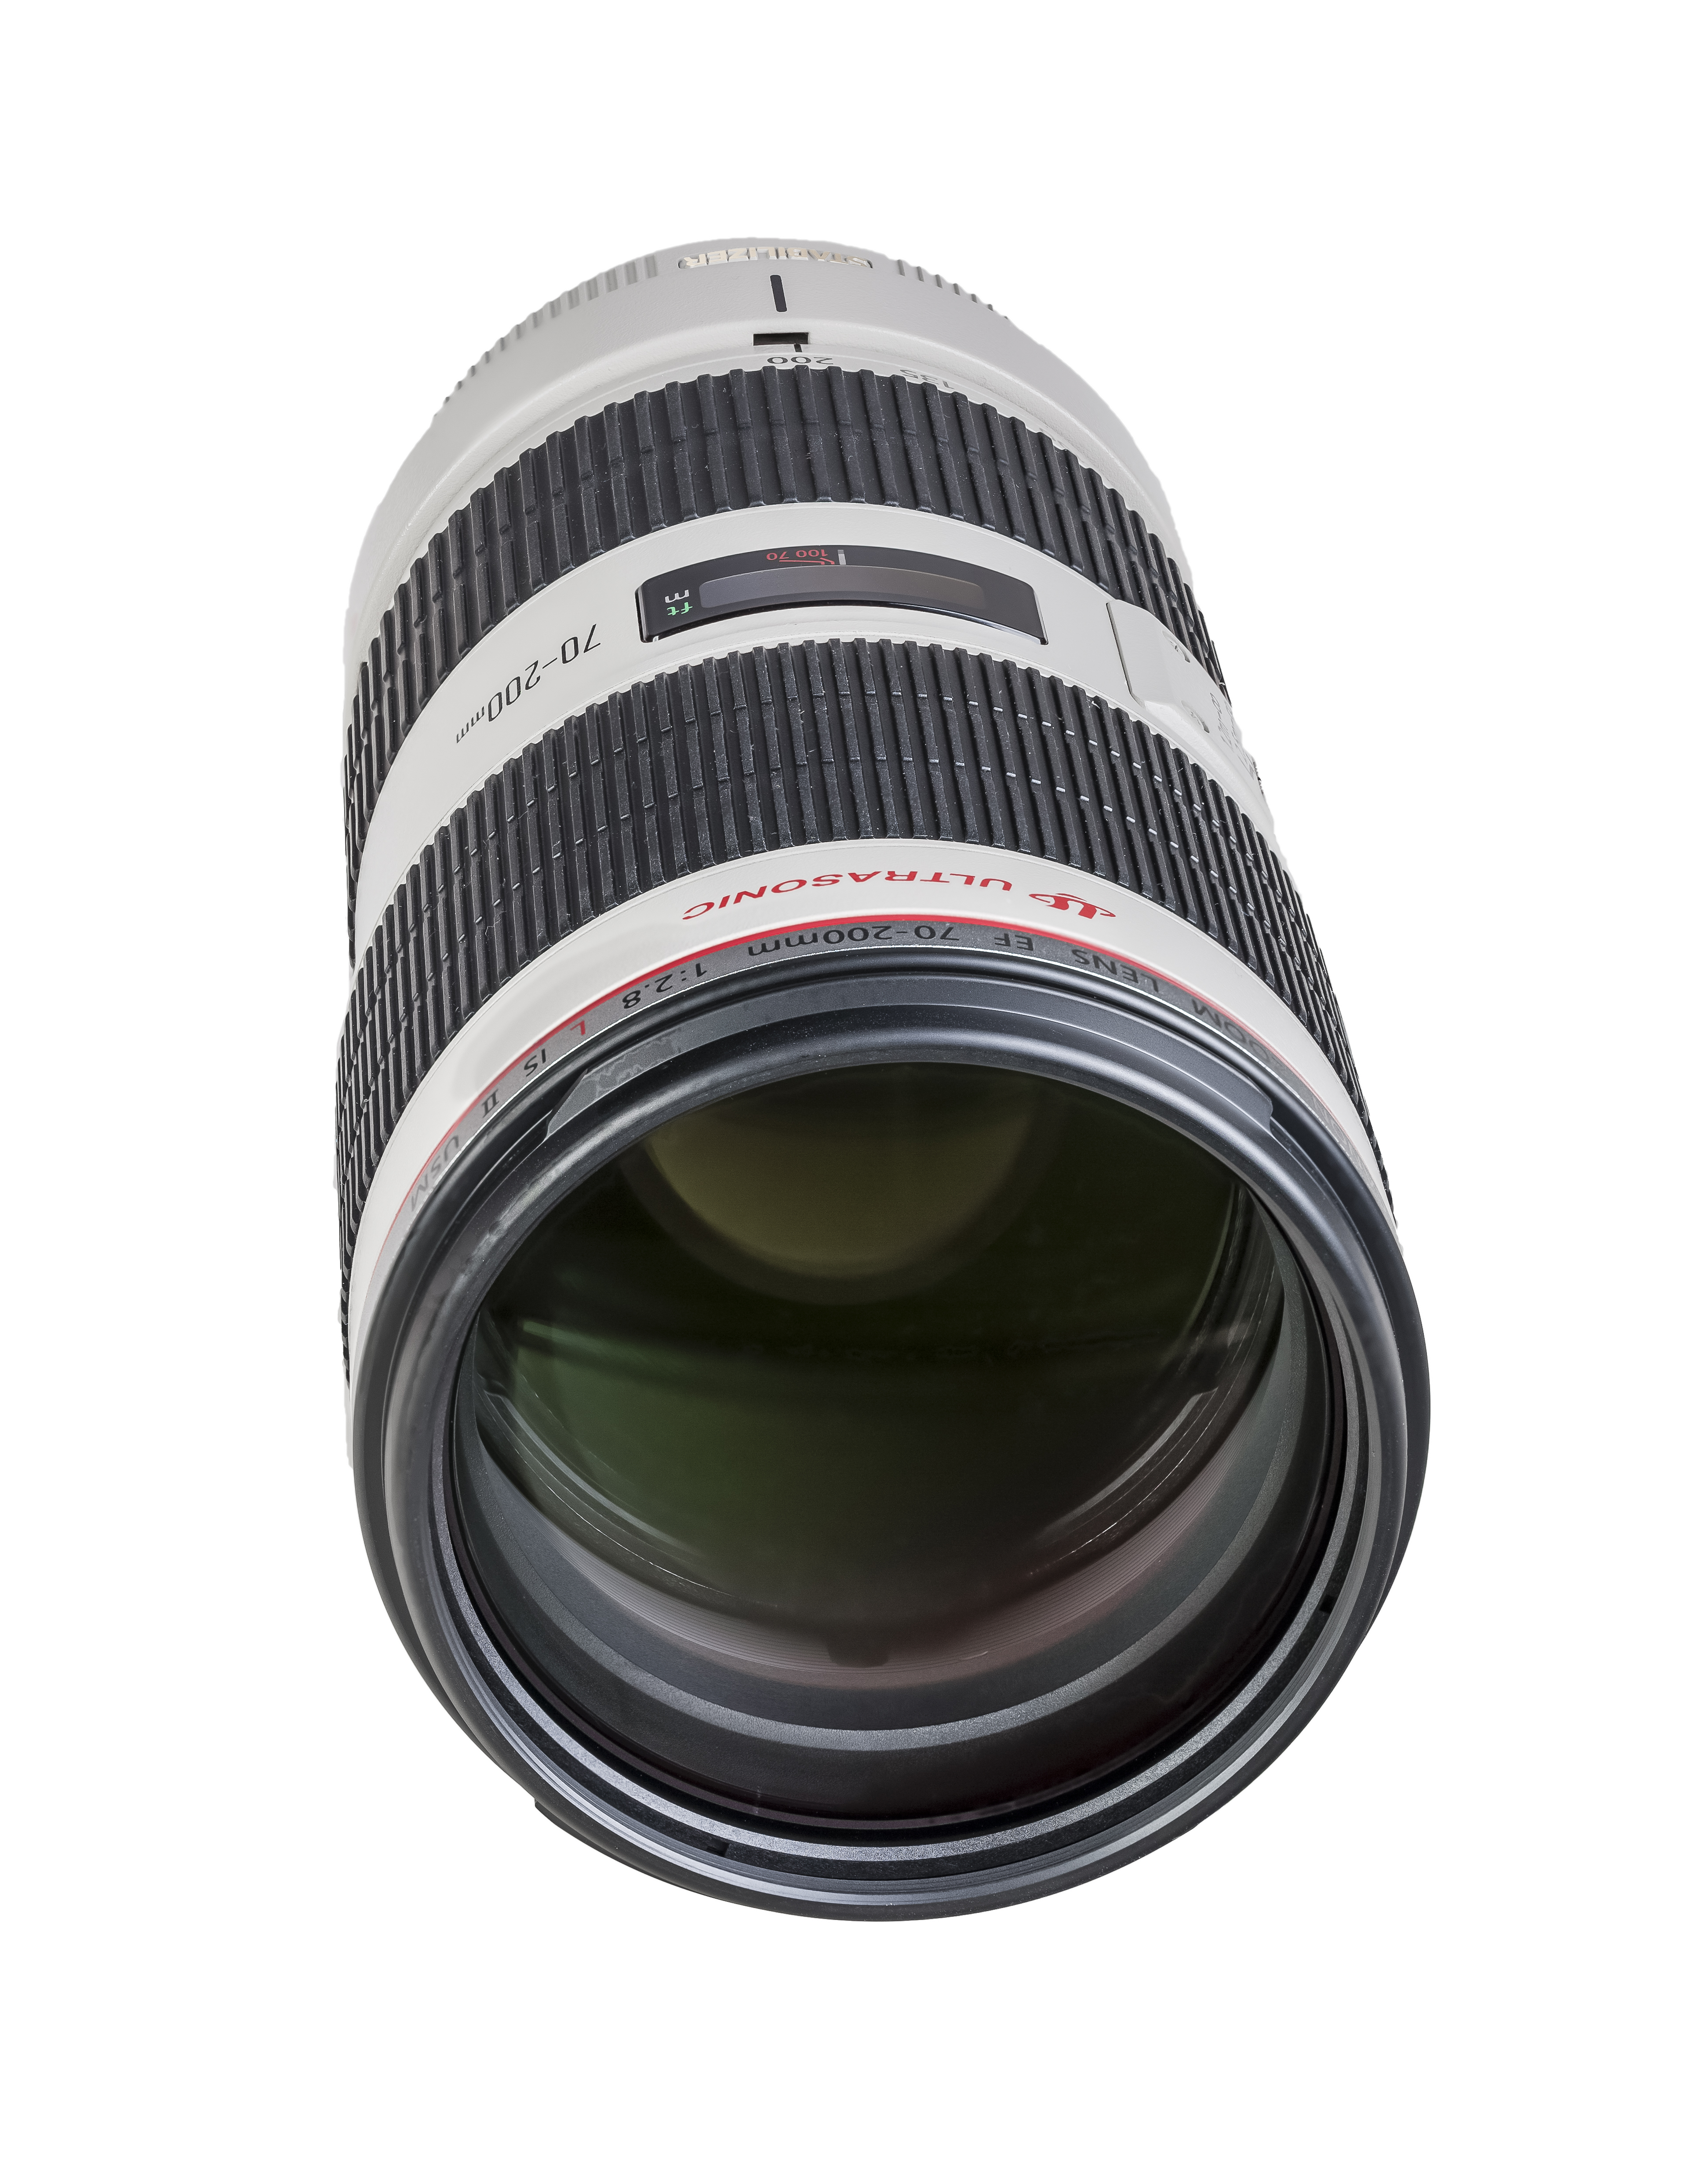 Canon Zoom-Lense EF 70-200 F2.8L IS II USM-02a